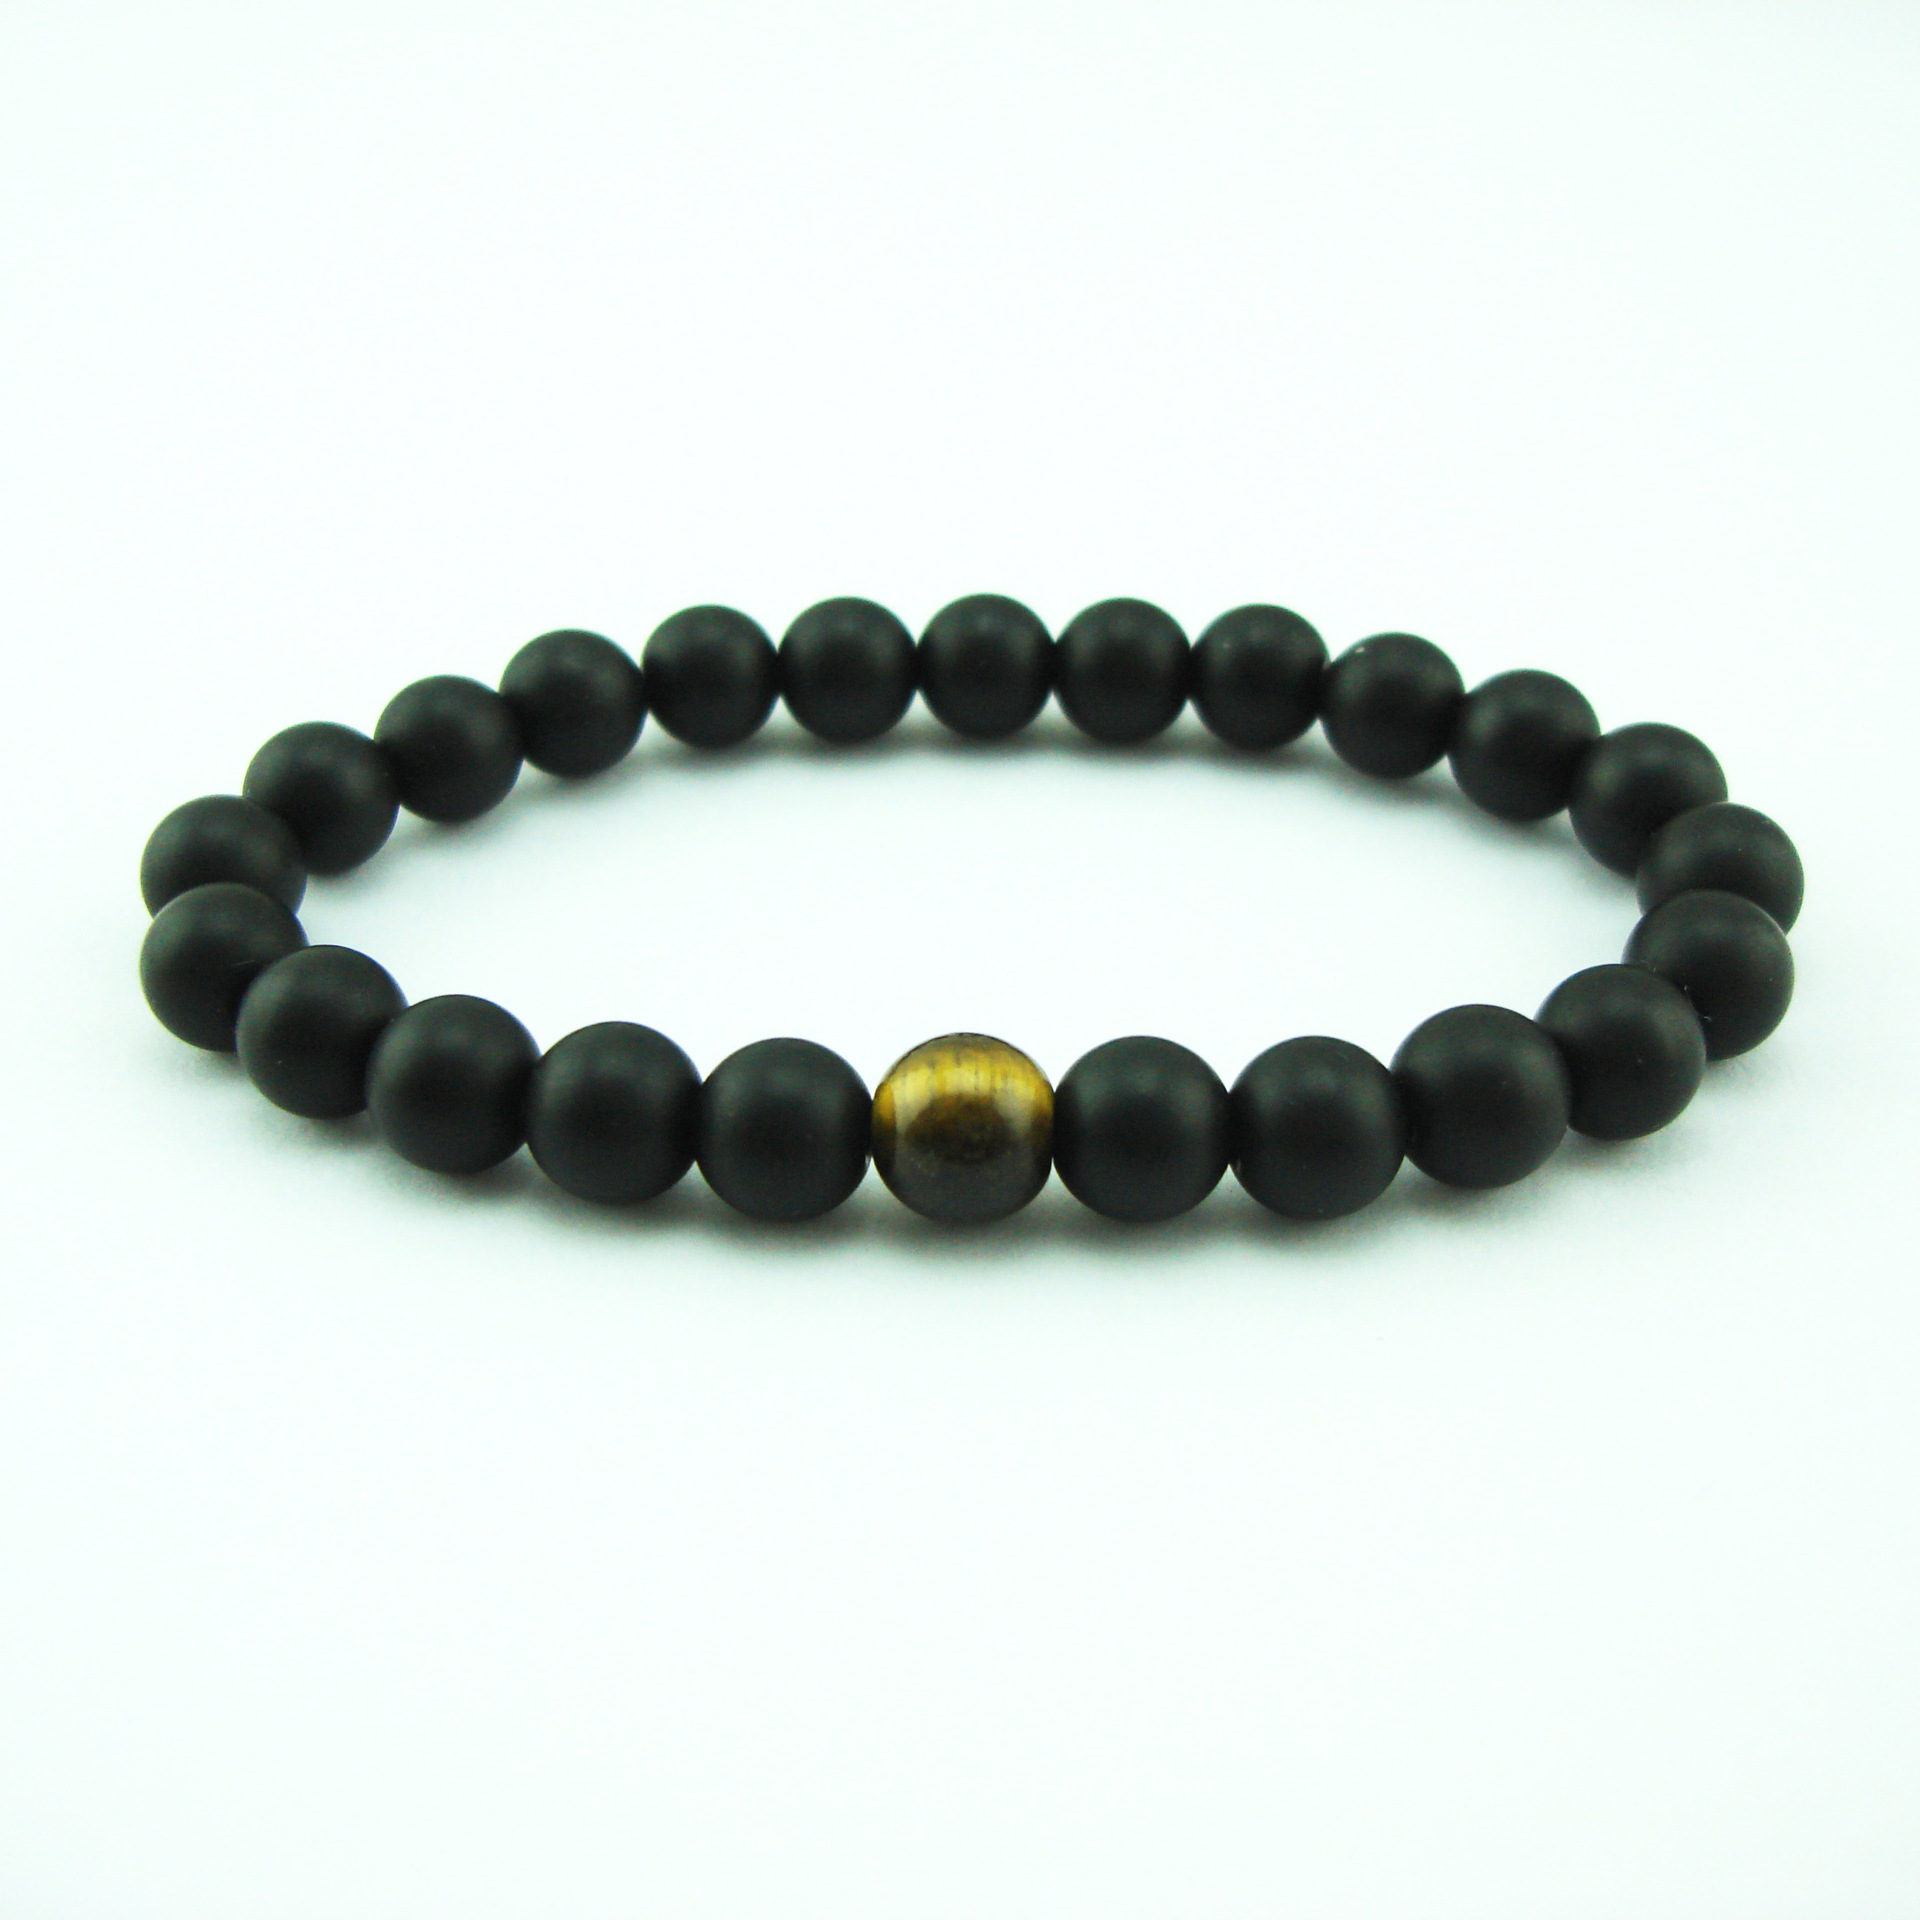 4:Frosted Black Onyx with Tiger Eye